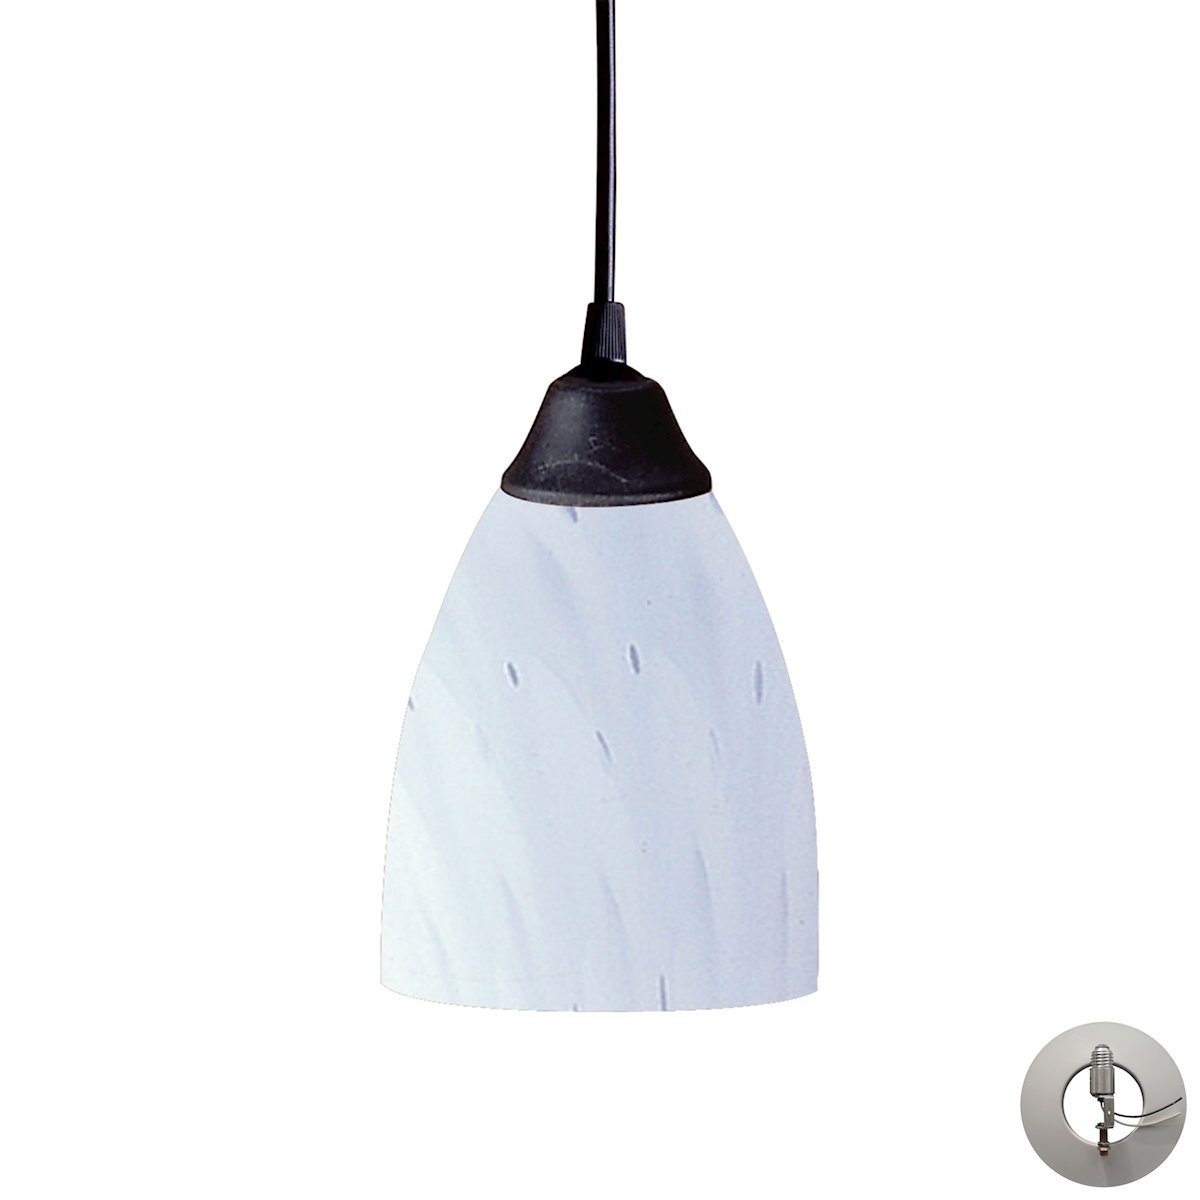 Classico Pendant In Dark Rust And Simply White Glass - Includes Recessed Lighting Kit Ceiling Elk Lighting 